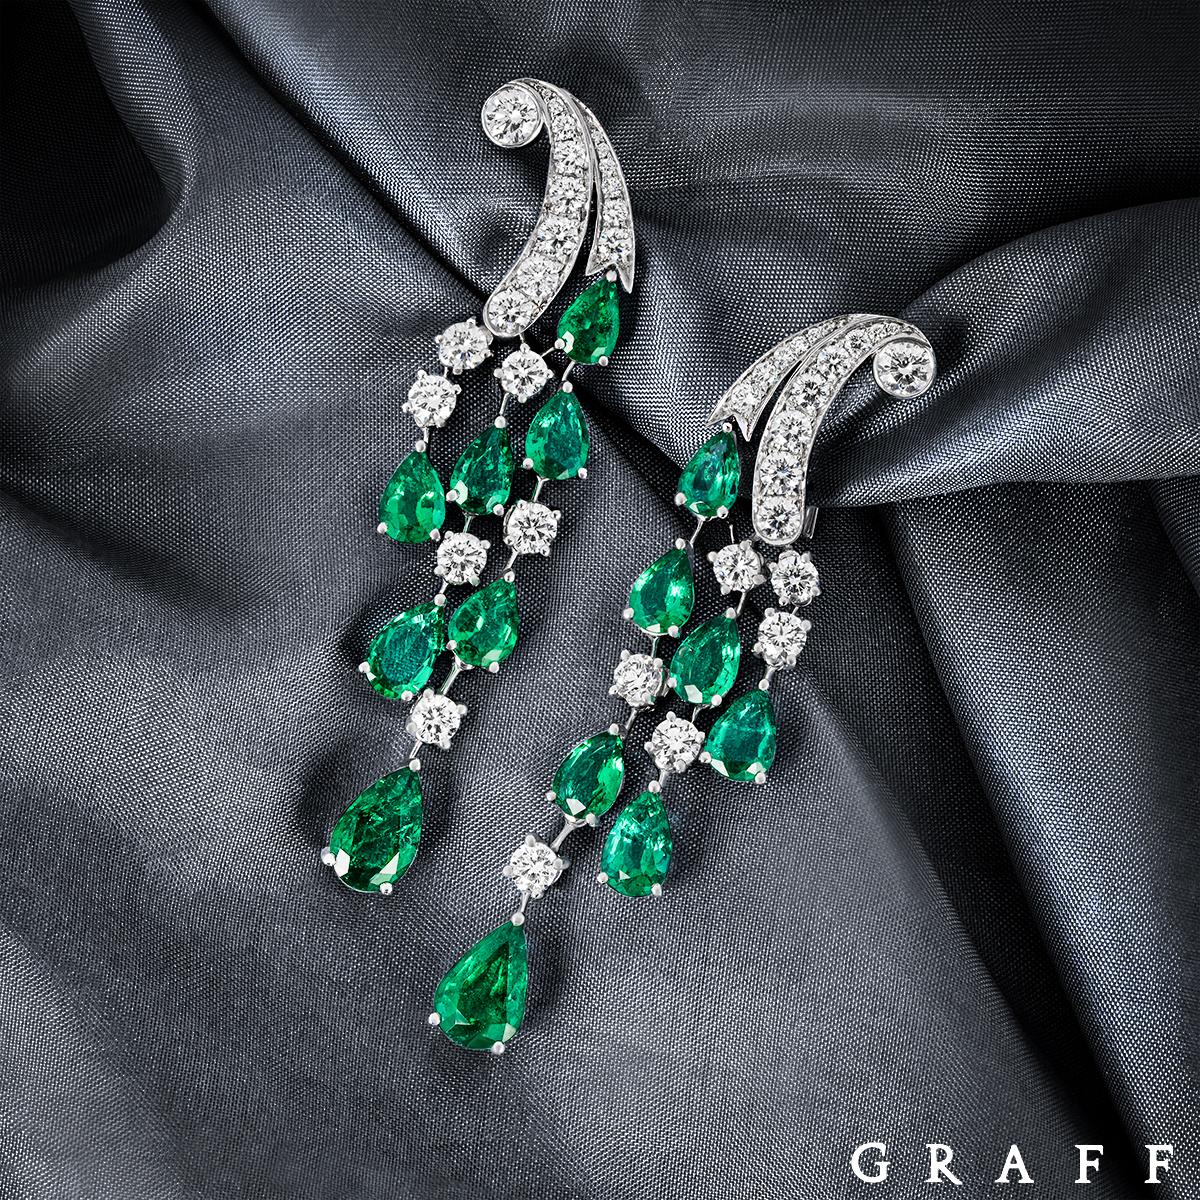 A magnificent pair of 18k white gold emerald and diamond earrings by Graff. The earrings feature a diamond set curved design that leads to 3 freely moving tassels that are set with emeralds and diamonds. There are 14 pear cut emeralds set throughout